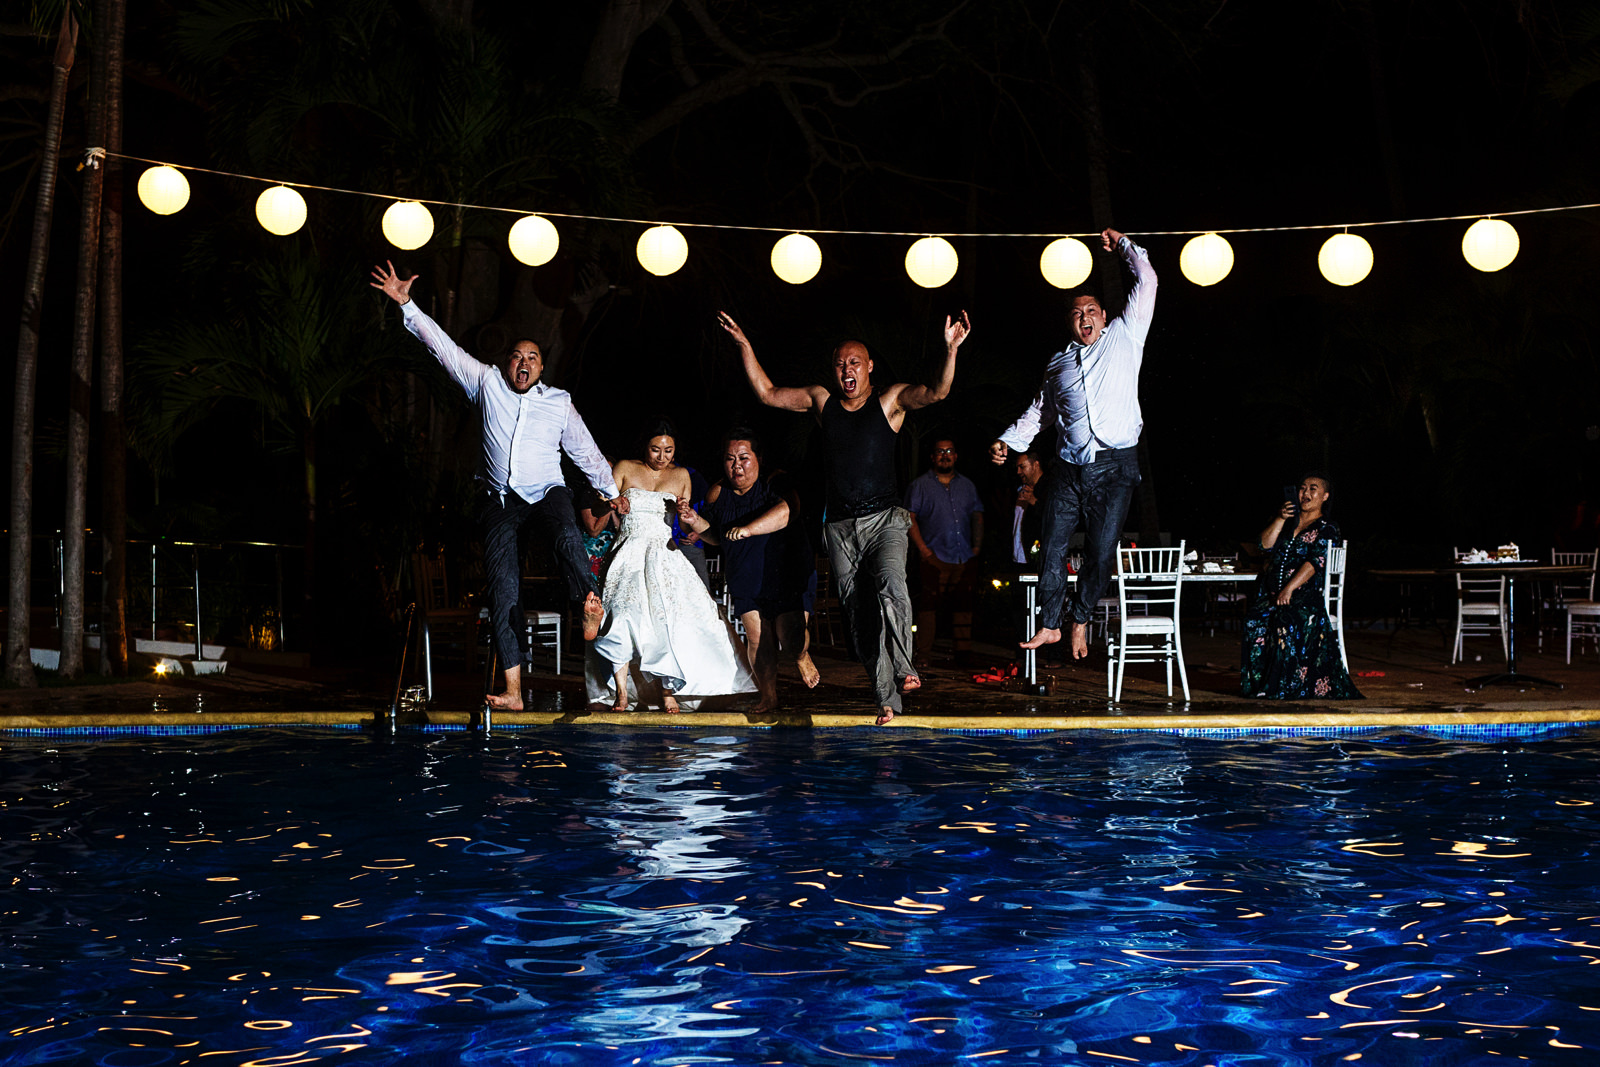 Groom and bride jump into the hotel pool among other wedding guests